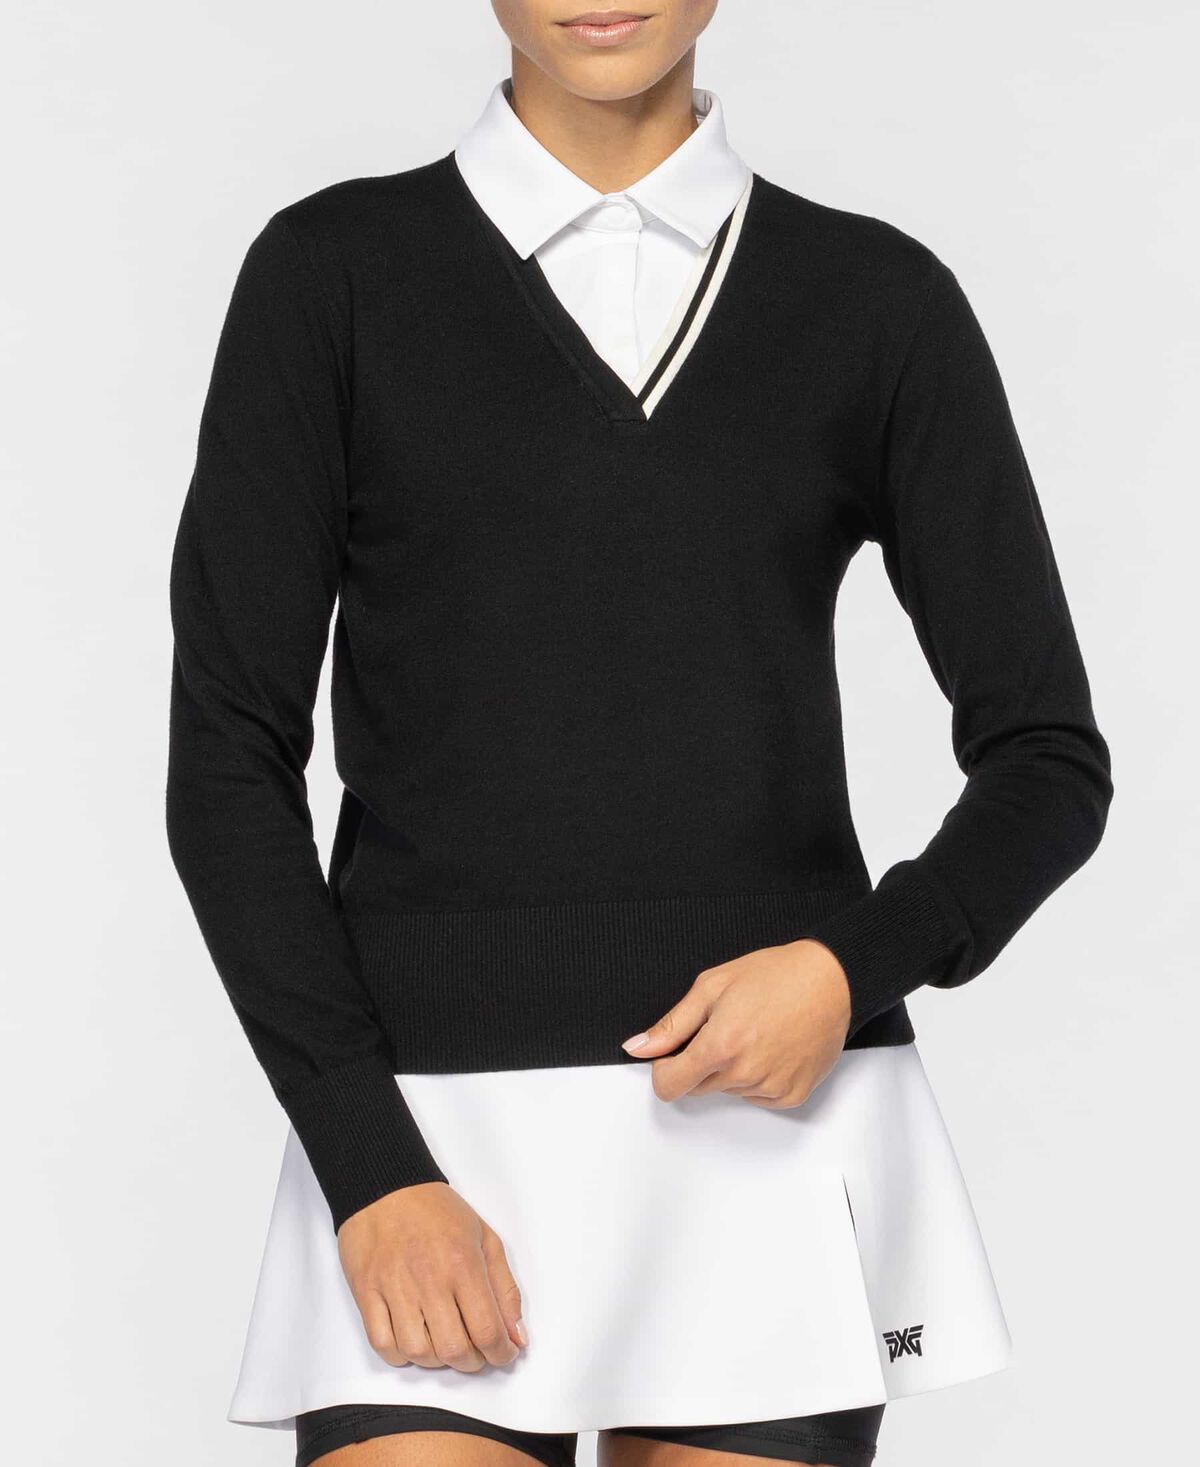 Women's Collared Two-In-One Sweater - Black - X-Small 